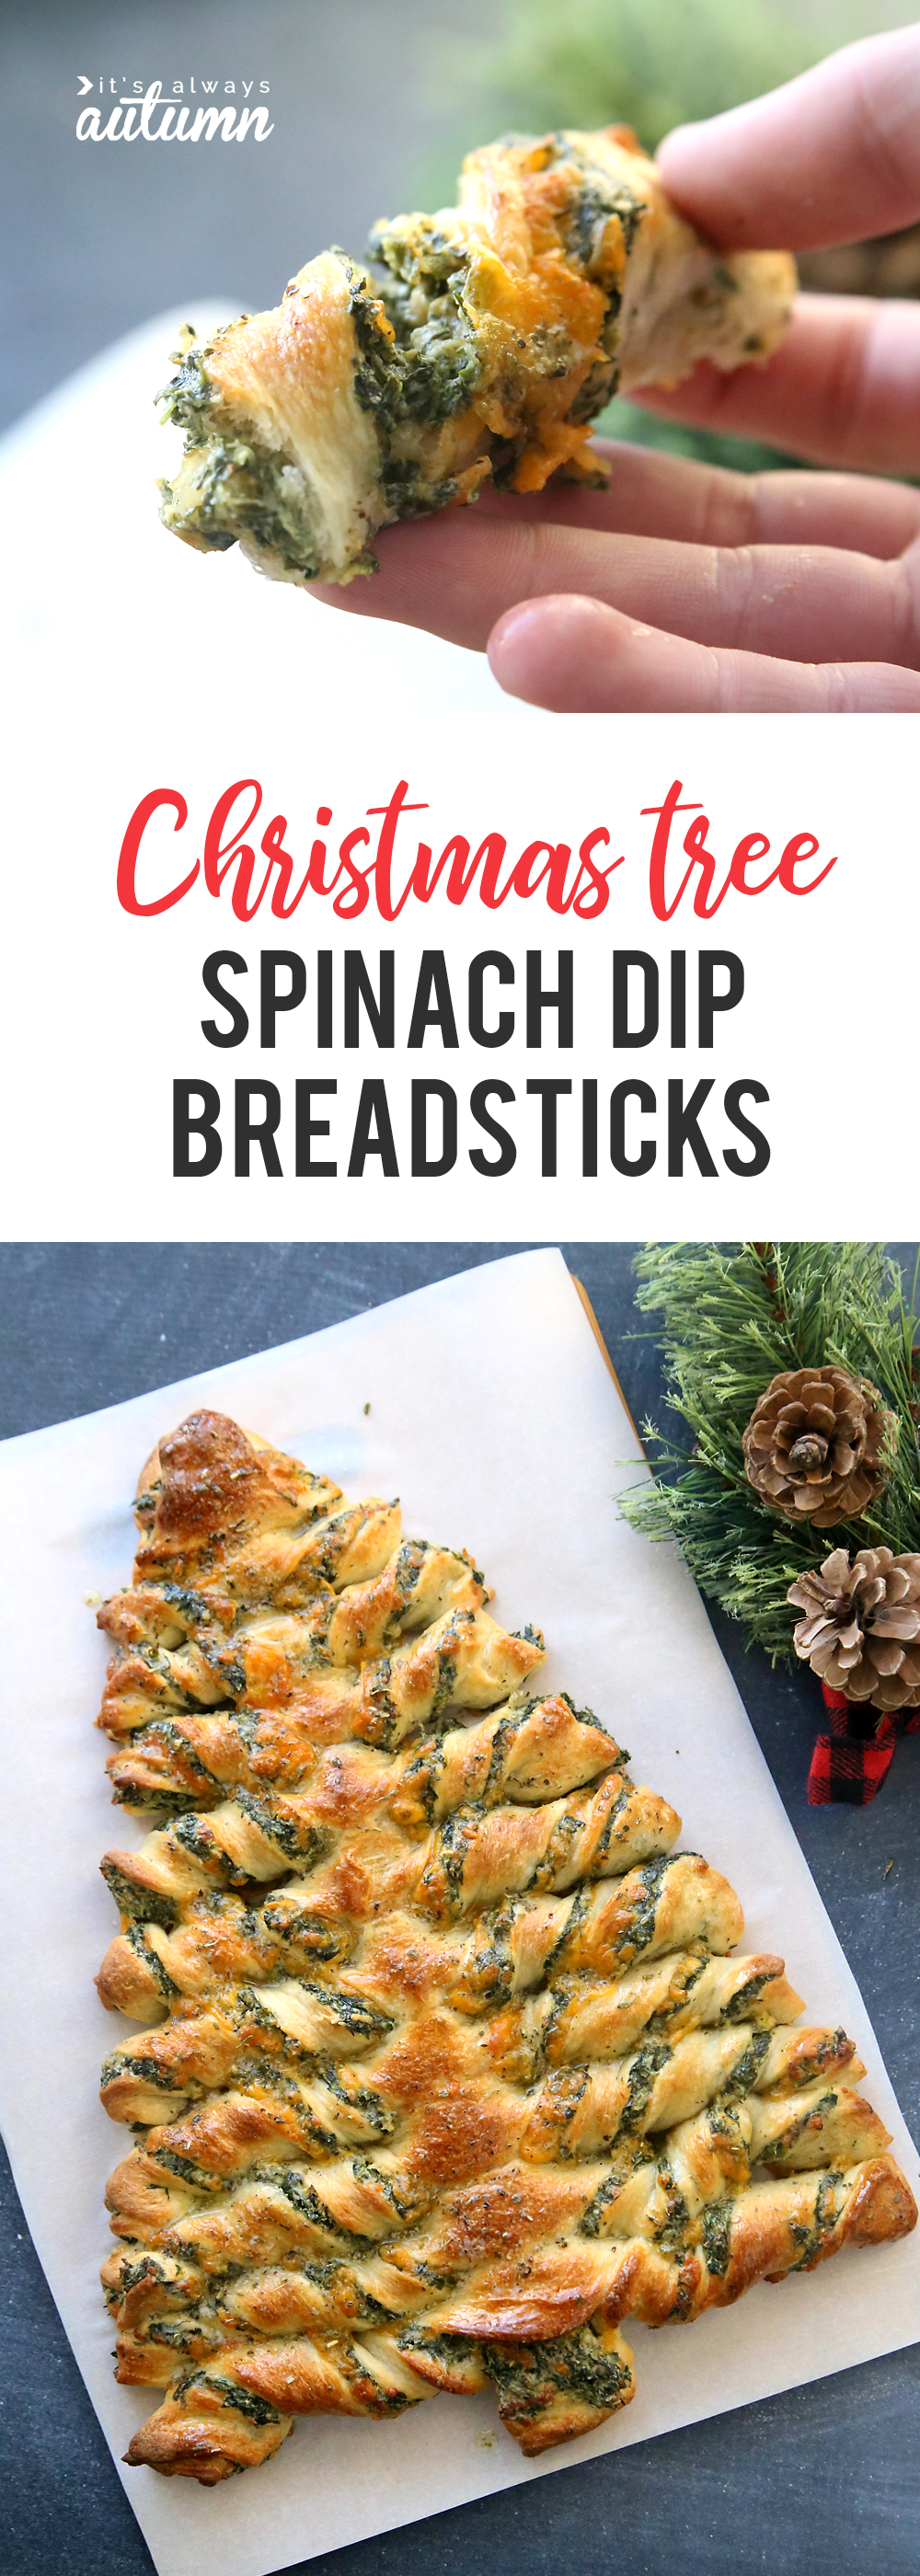 Spinach dip filled breadsticks in the shape of a Christmas tree